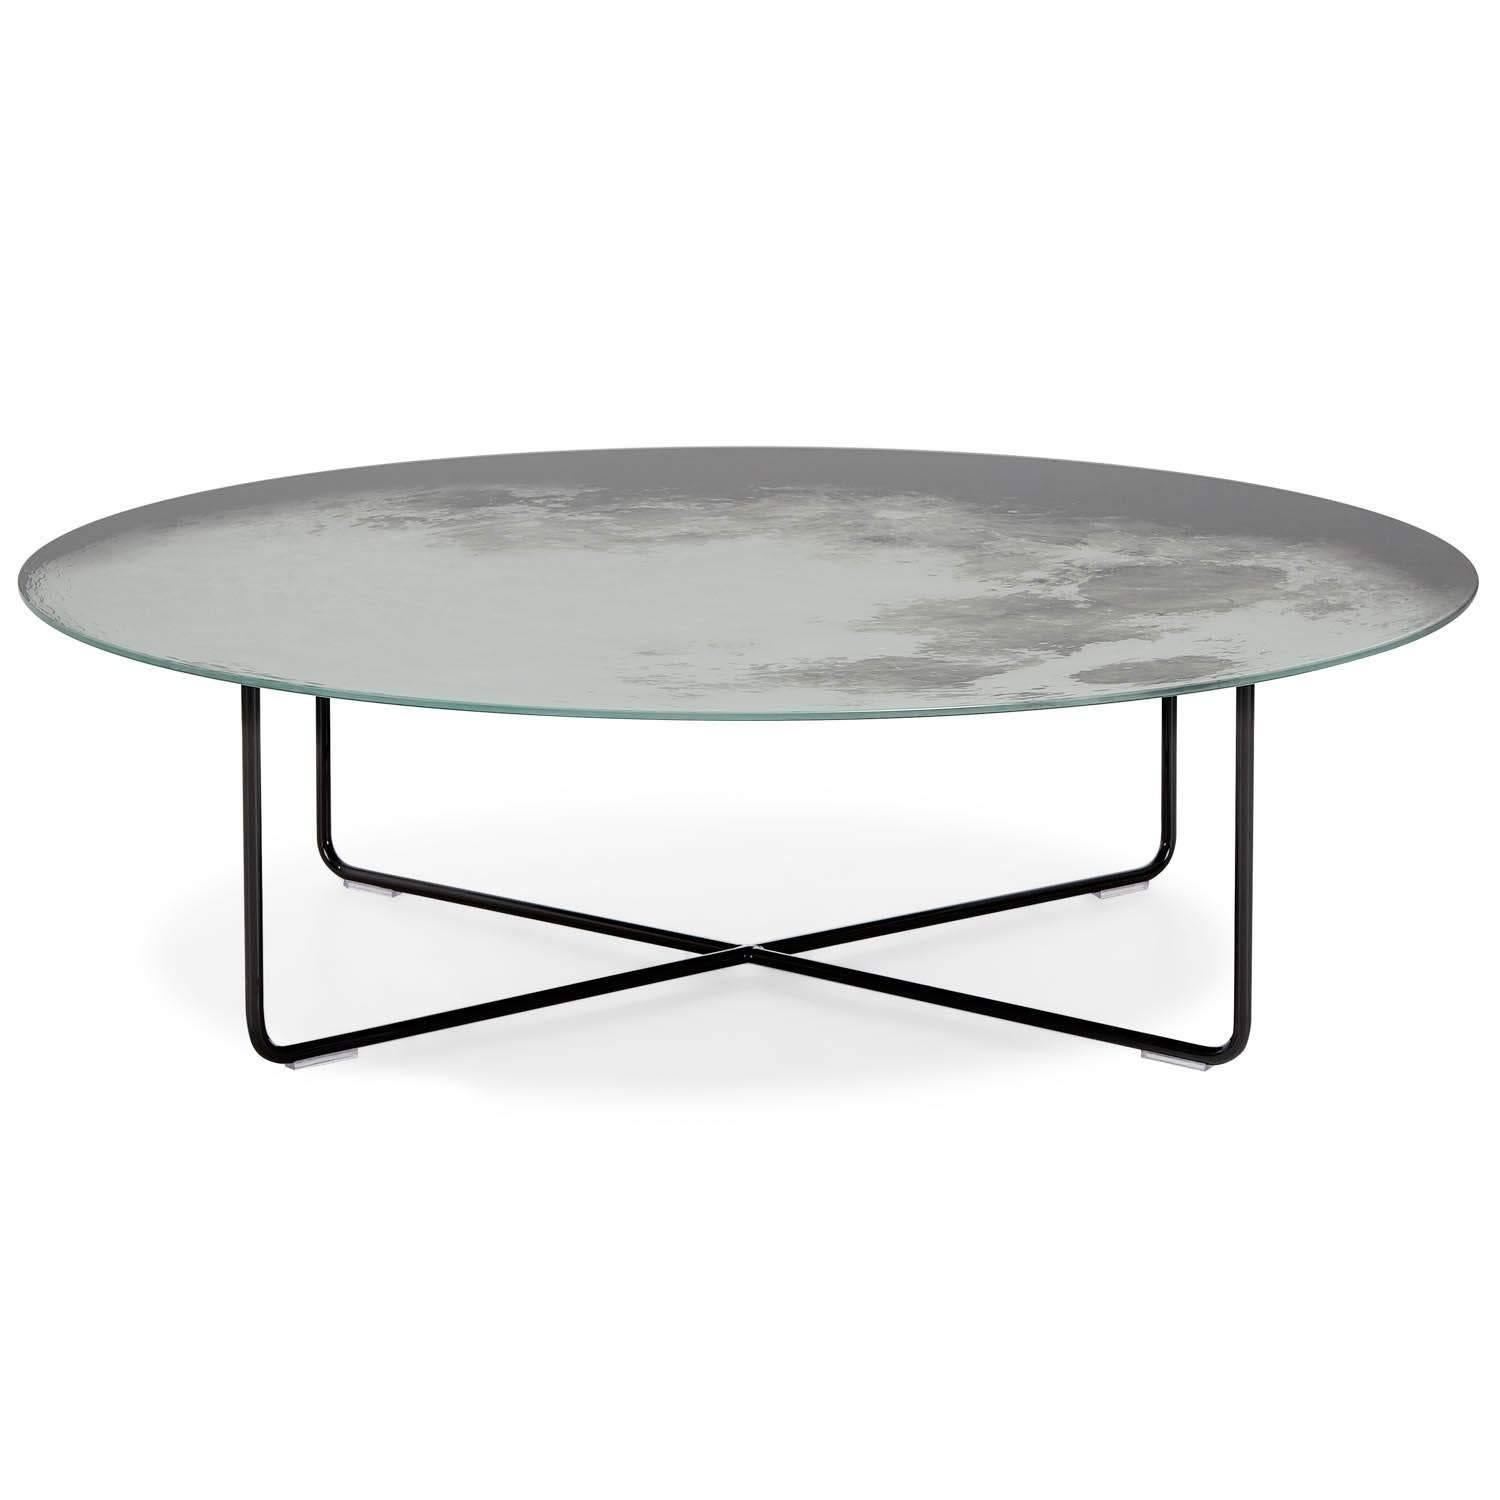 Round coffee table in printed mirror finish by Moroso with Diesel. 

It is your personal piece of the night sky. The moon printed on the mirrored surface combines function and fantasy. Let yourself go and howl at the moon.

Glass mirror with